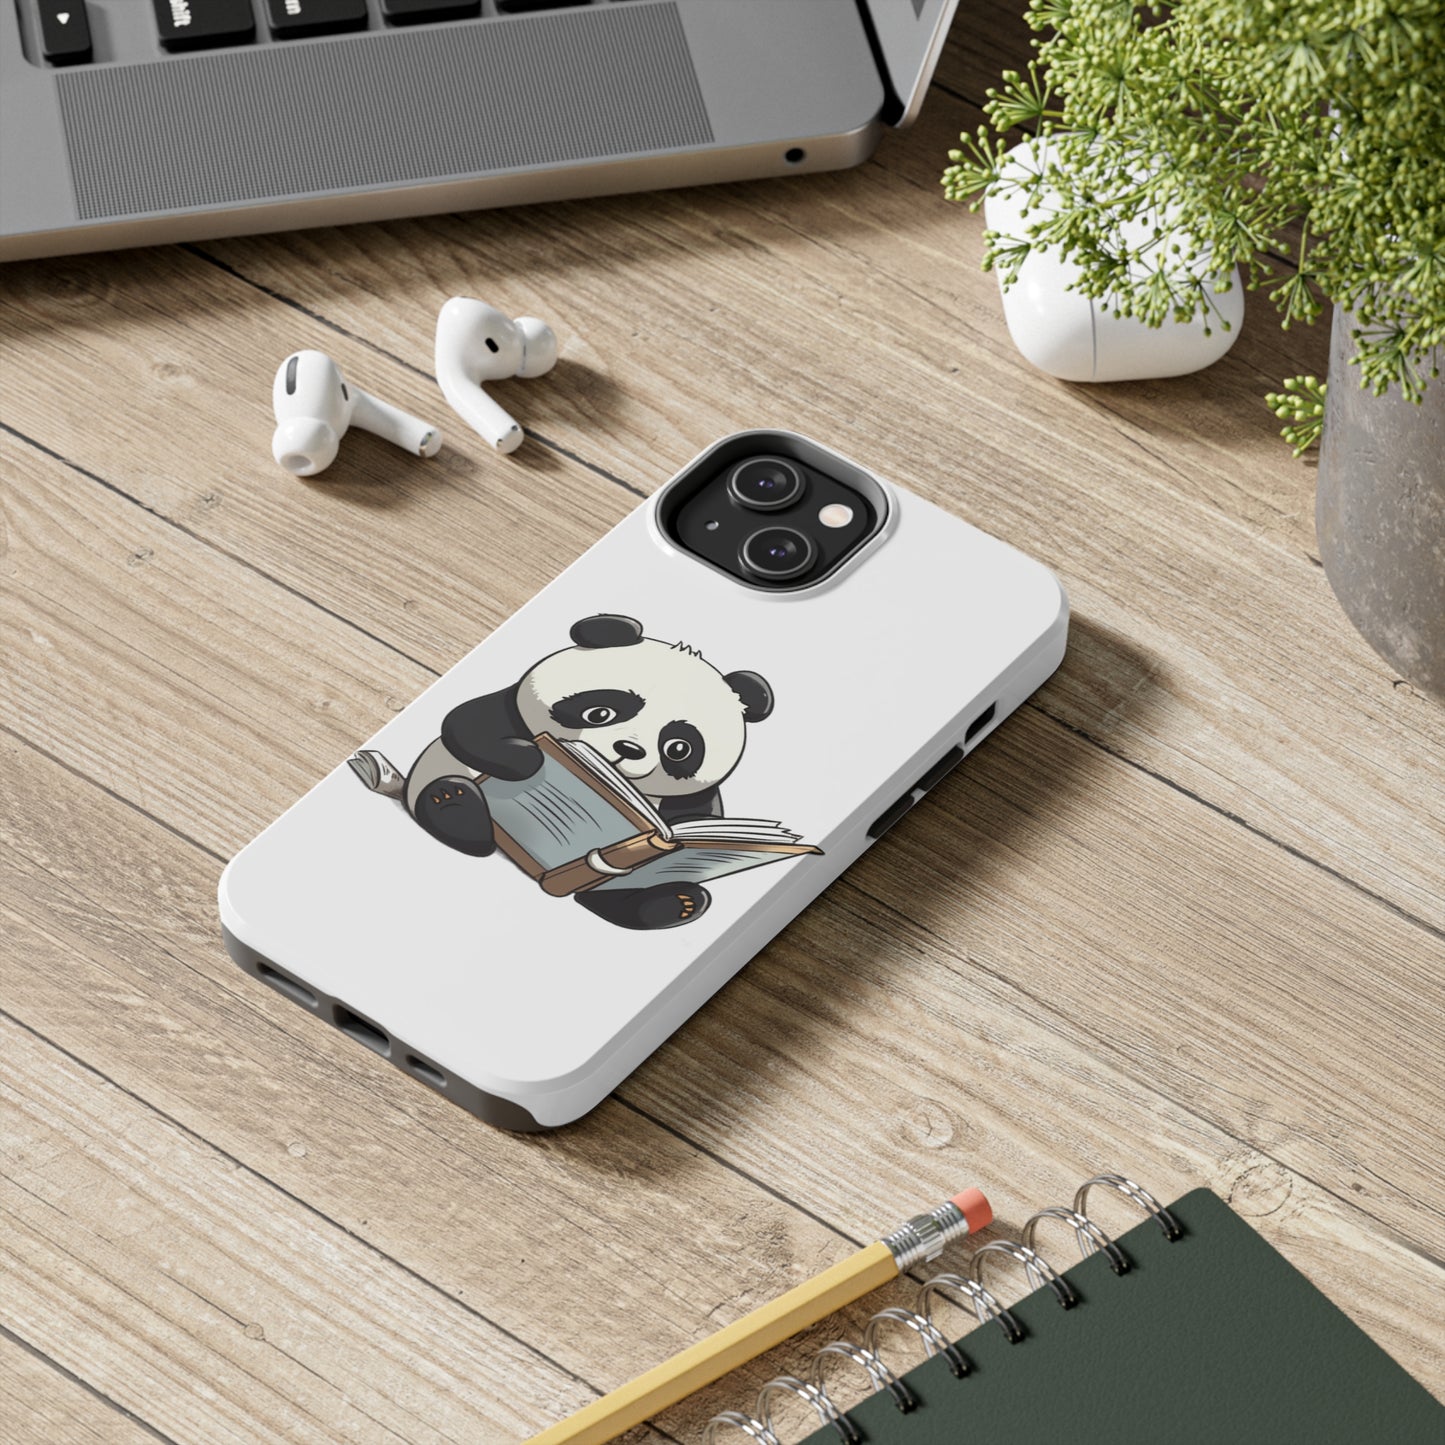 Tough Phone Cases with a print on it of A studious panda engrossed in a humorous pun book:

Panda